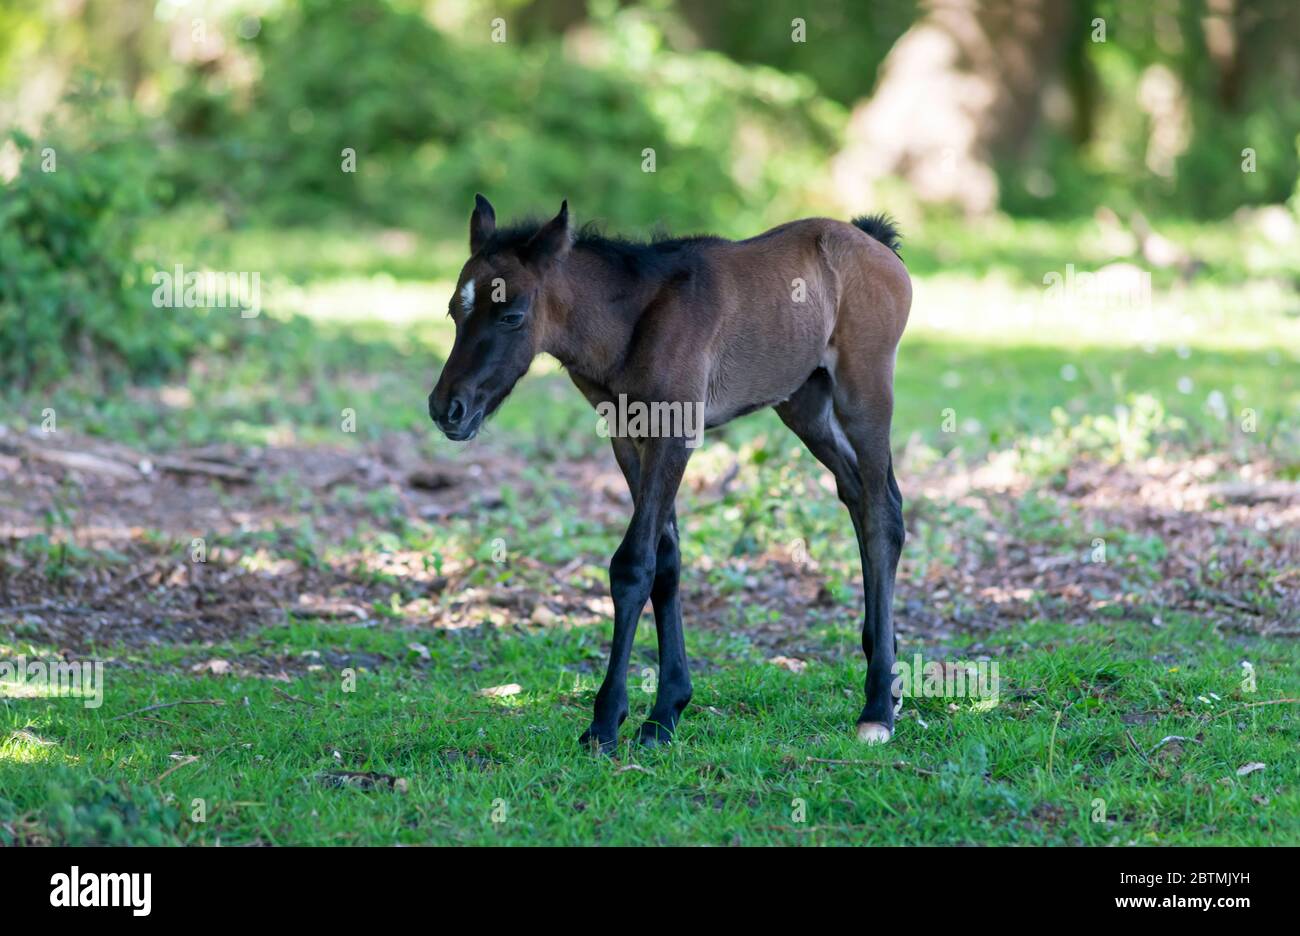 Adorable dark bay foal of New Forest pony walking in shade on summer day in green garden Stock Photo